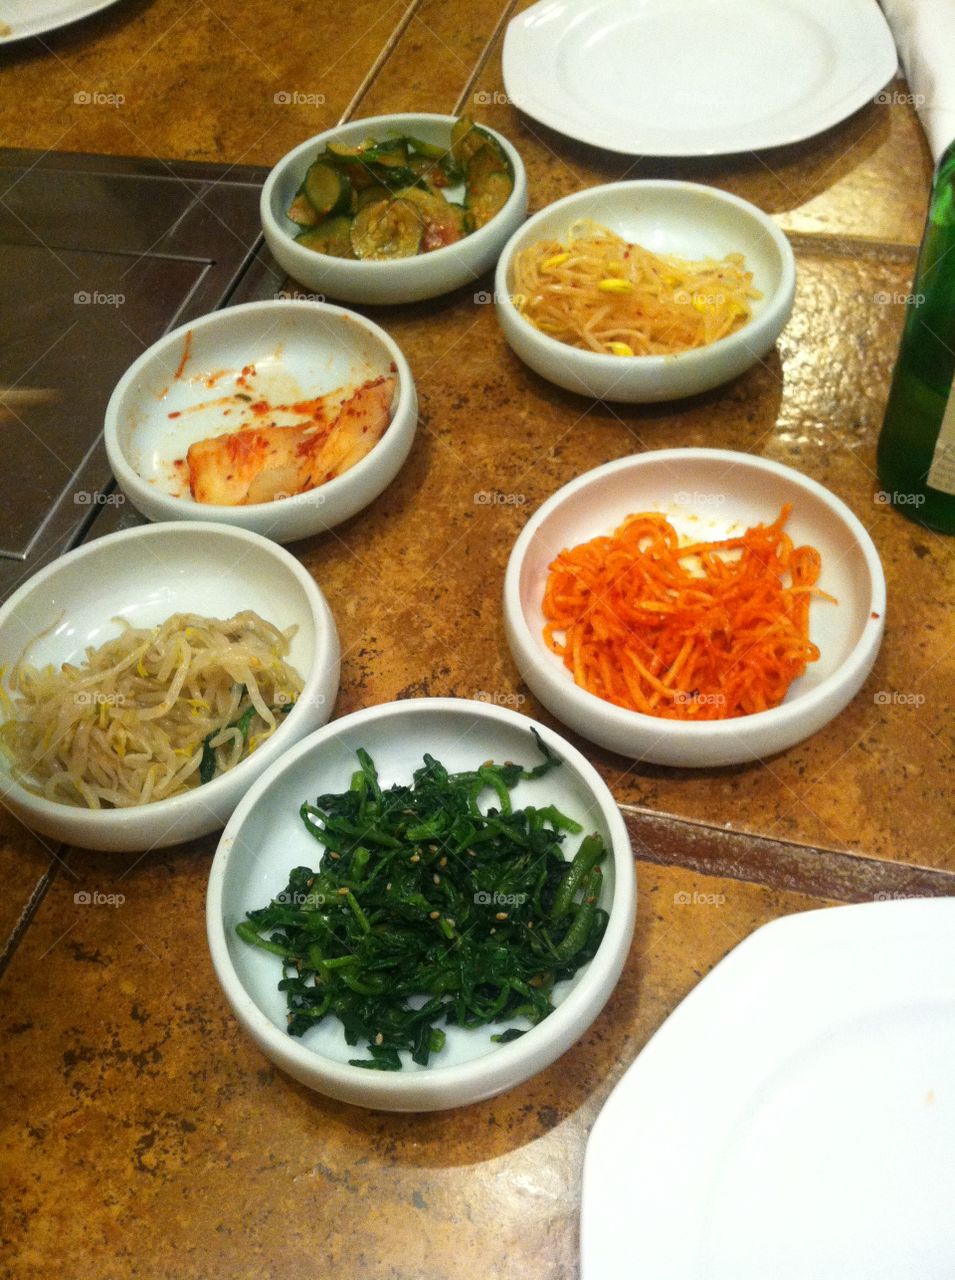 One of my favorite reasons to eat Korean food are the many side dishes! 